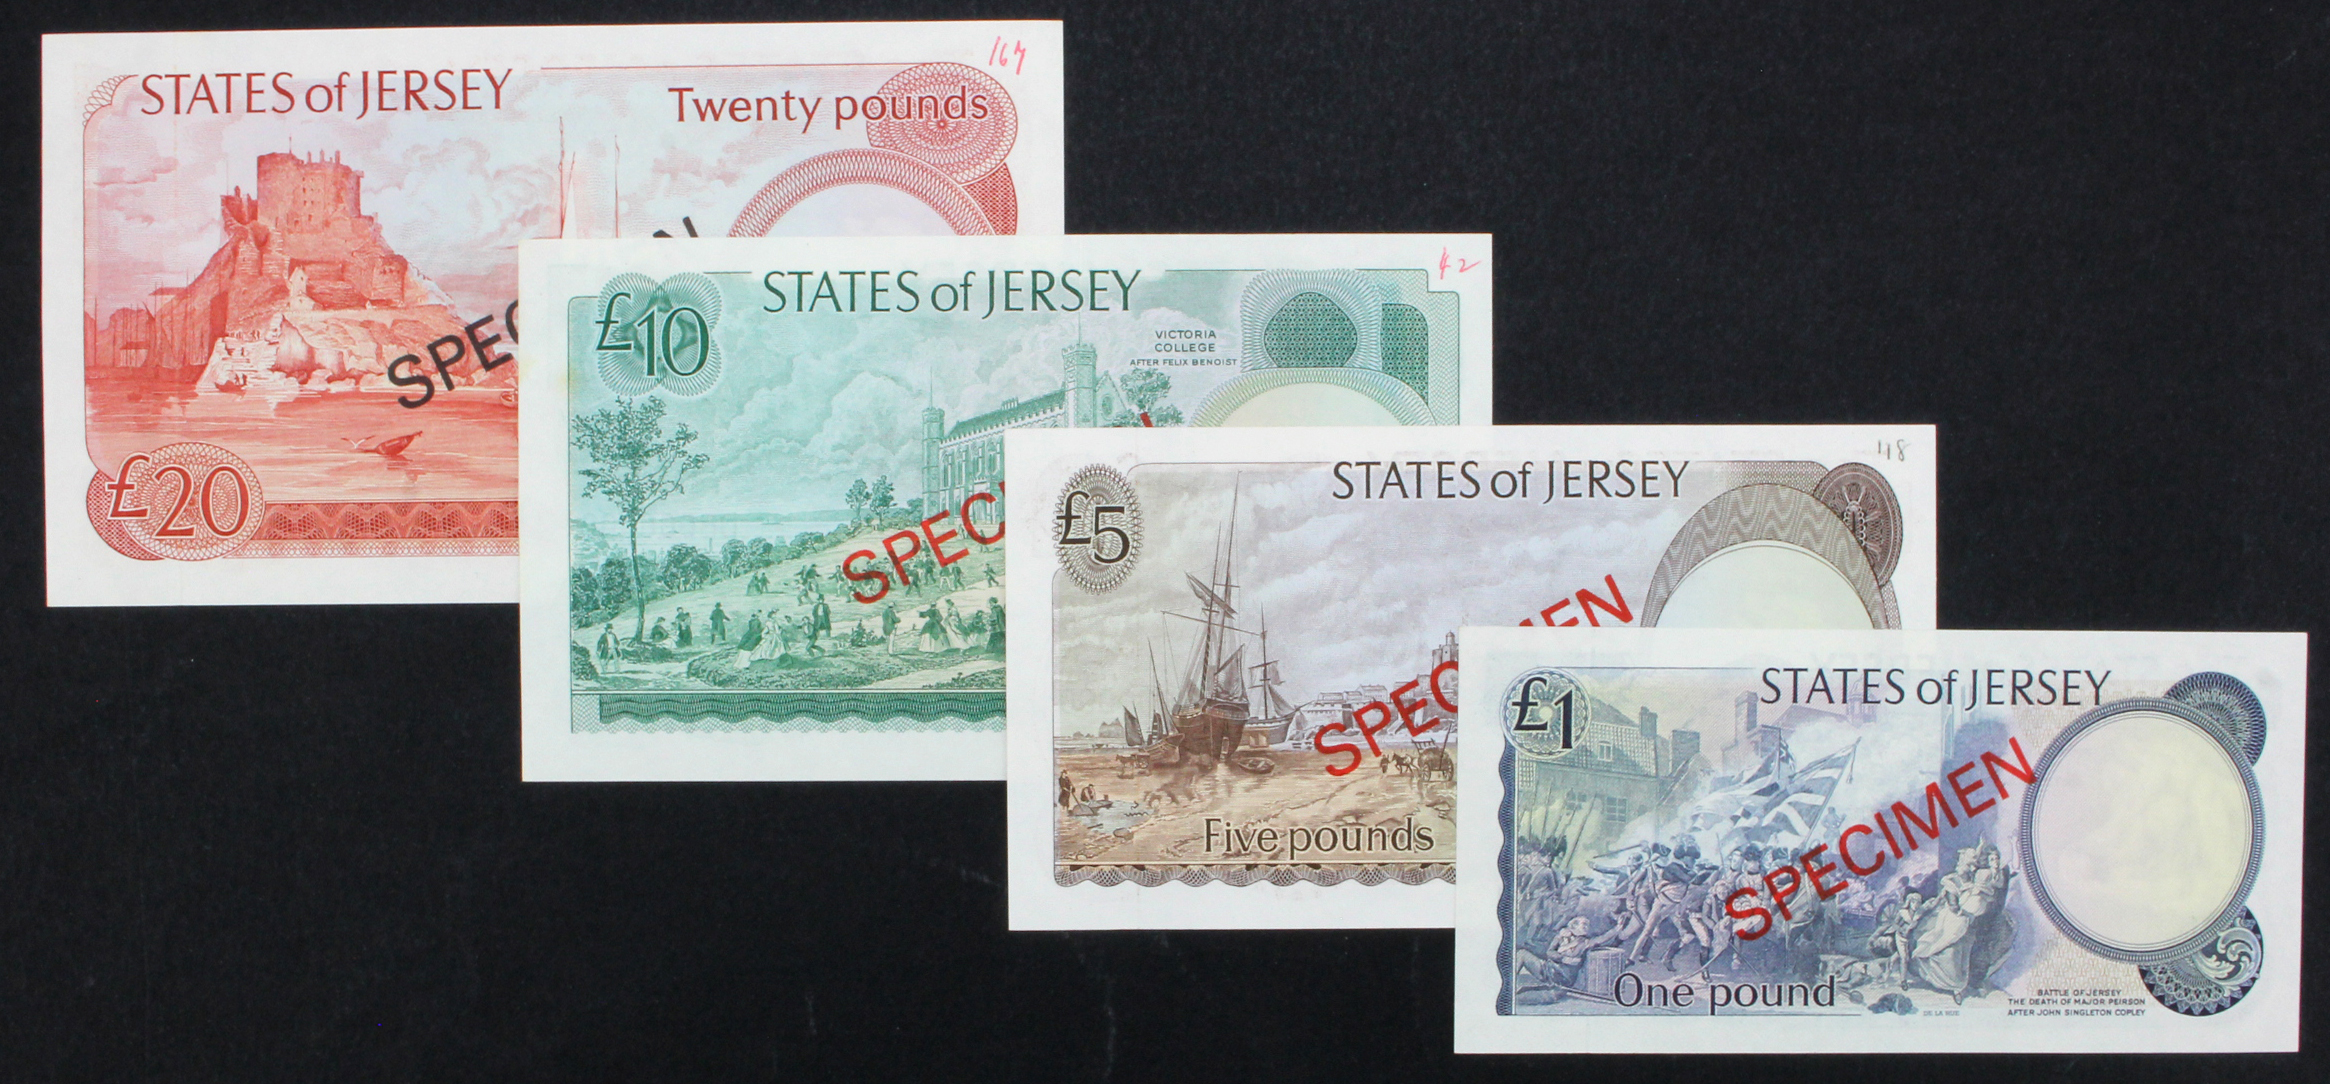 Jersey (4), a set of SPECIMEN notes, 20 Pounds, 10 Pounds, 5 Pounds and 1 Pound issued 1976 signed